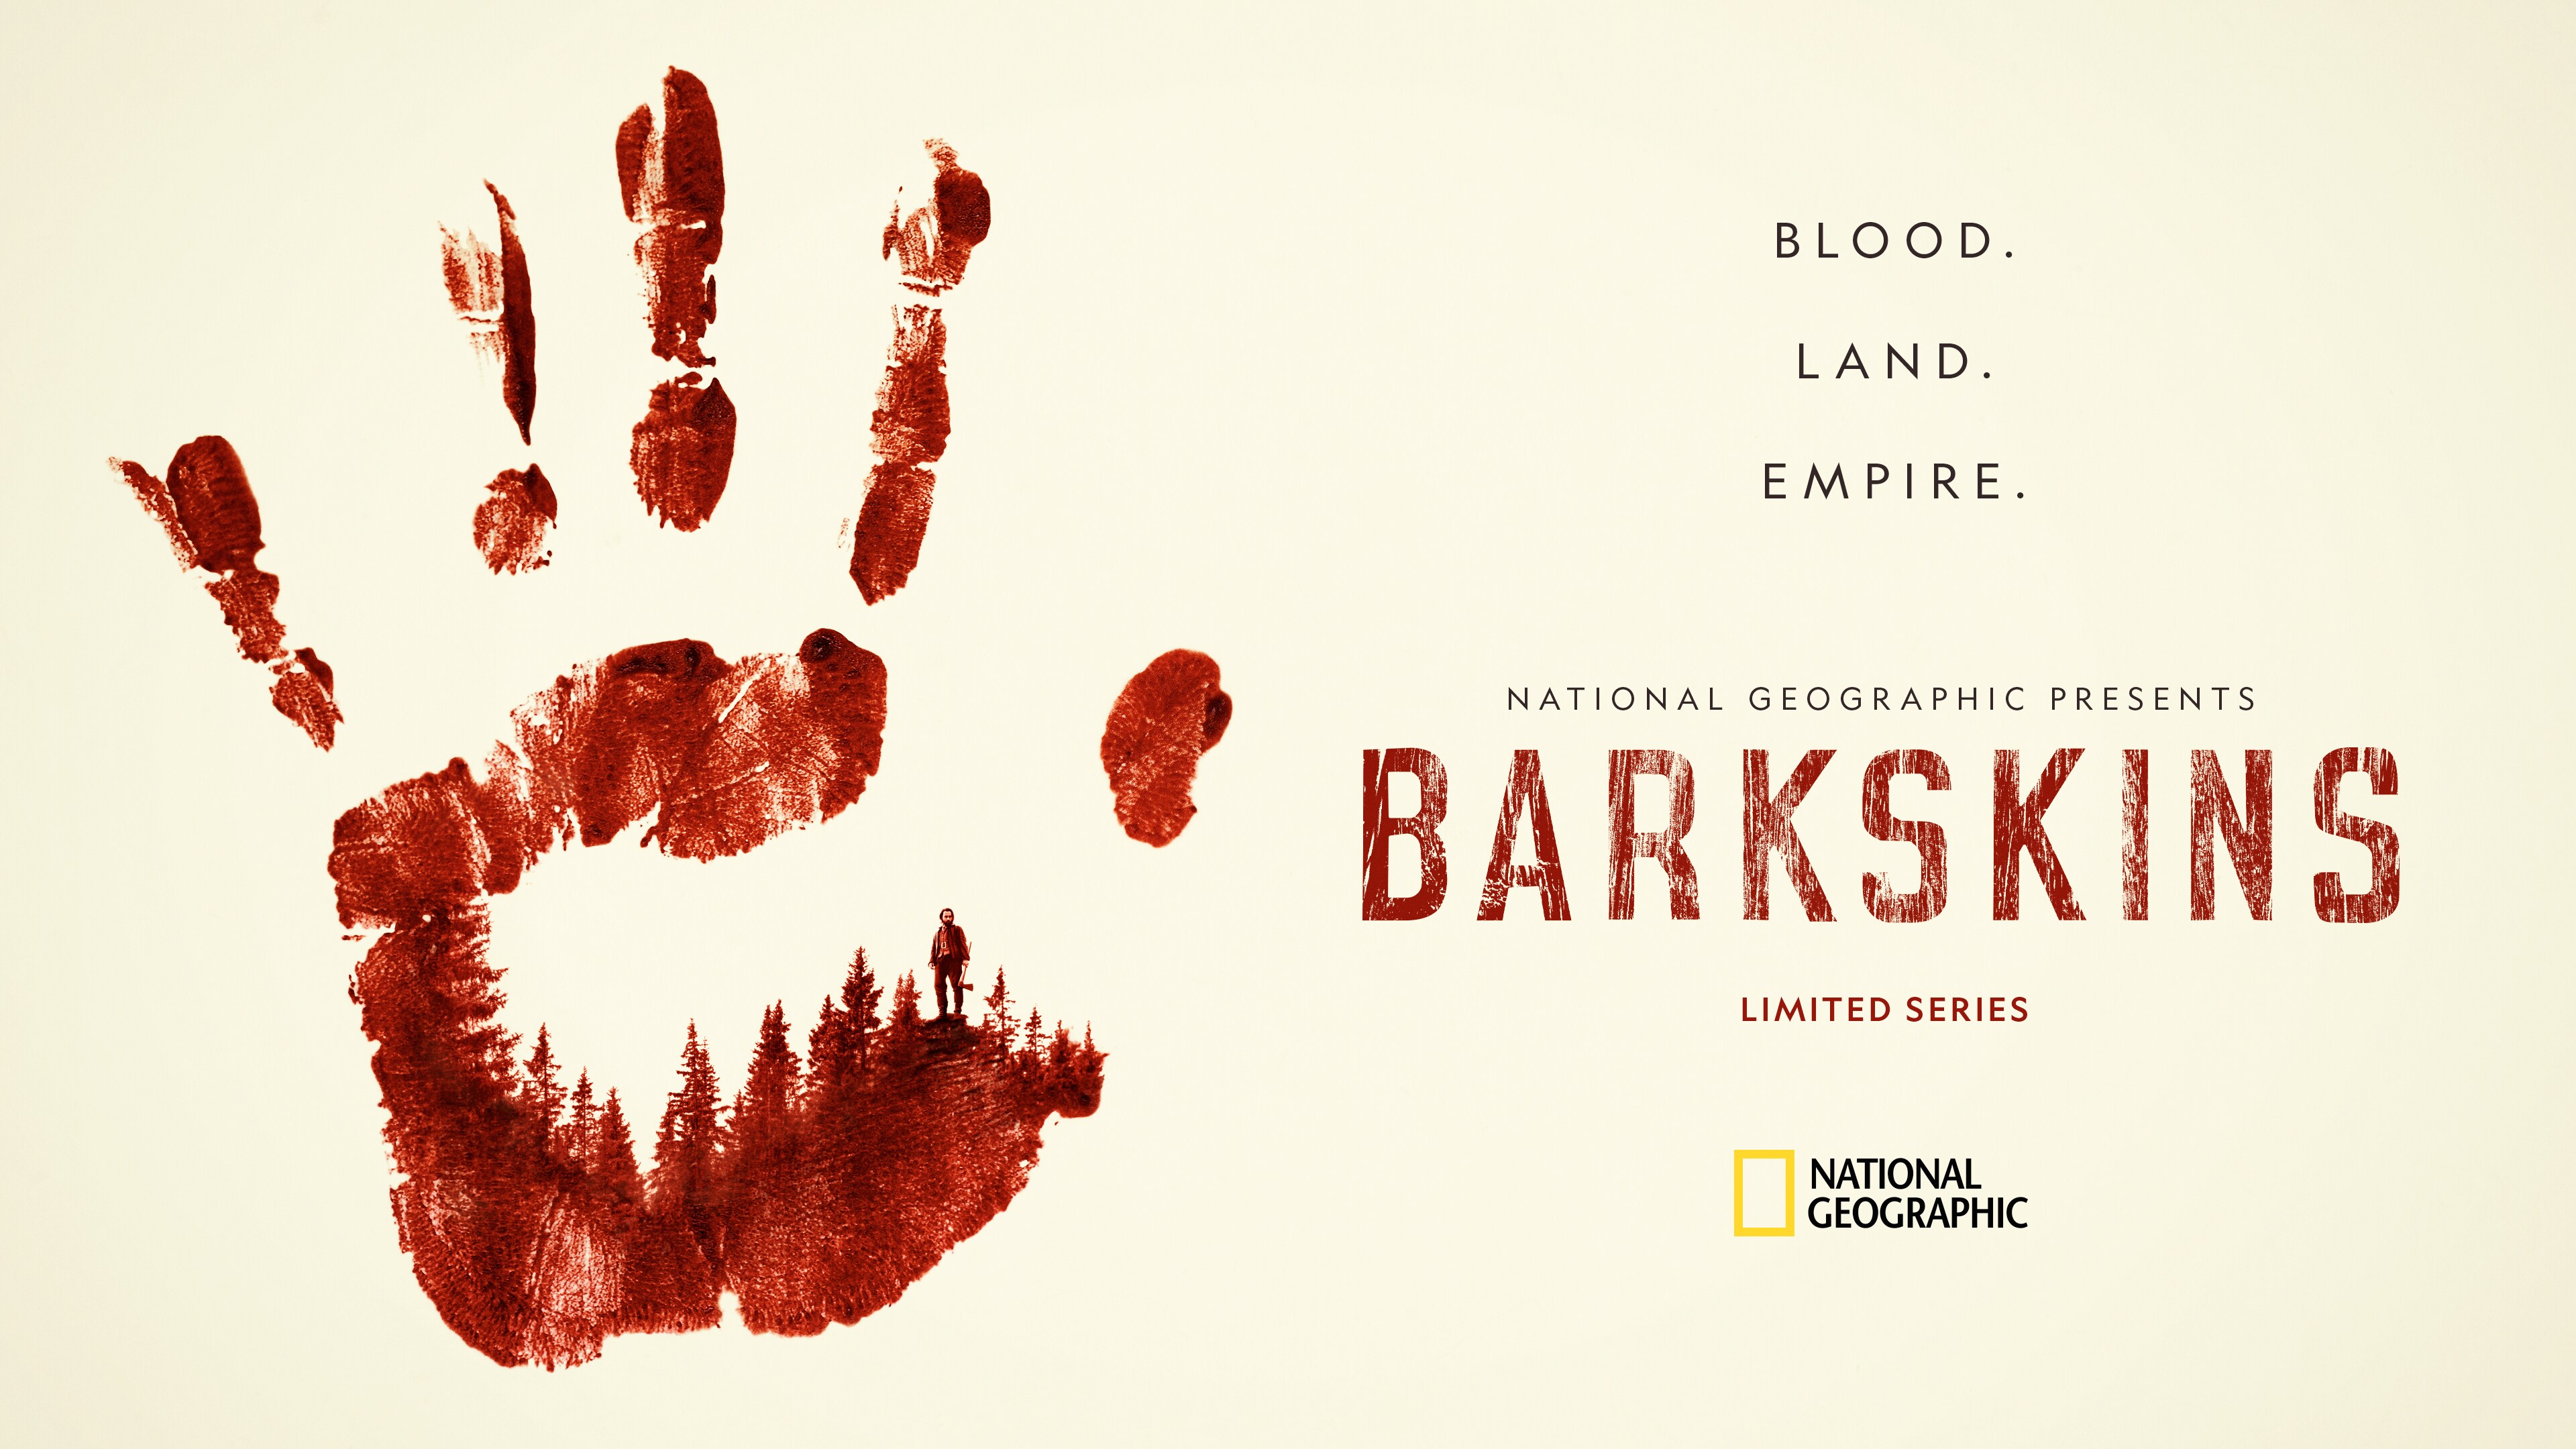 National Geographic announces limited series "Barkskins" to premiere with back-to-back episodes over four weeks beginning Tuesday 4th August at 9pm